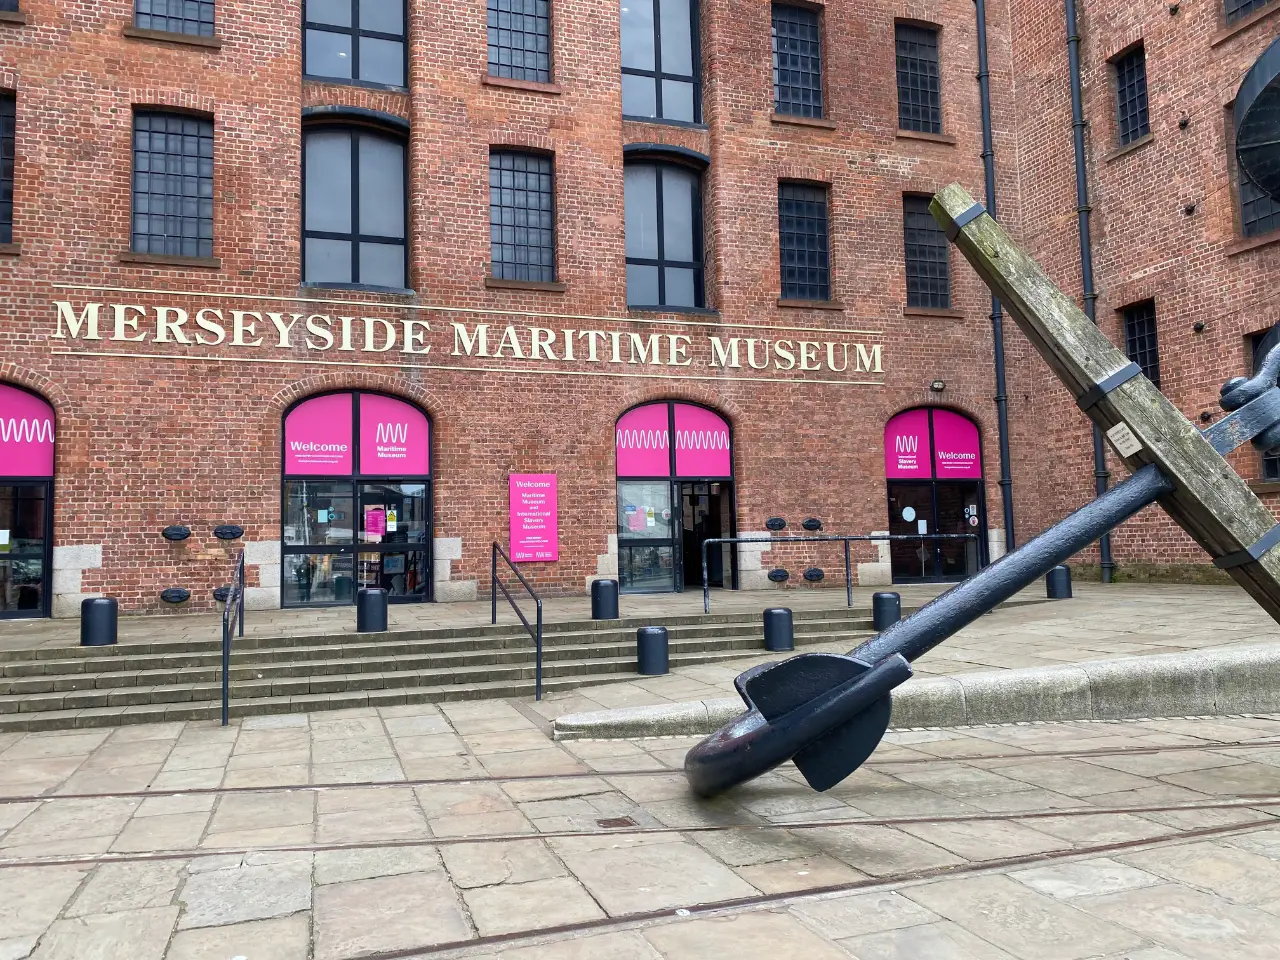 Merseyside Maritime Museum from the outside, one of the best free museums in Liverpool. You can see a huge anchor in front of the museum.